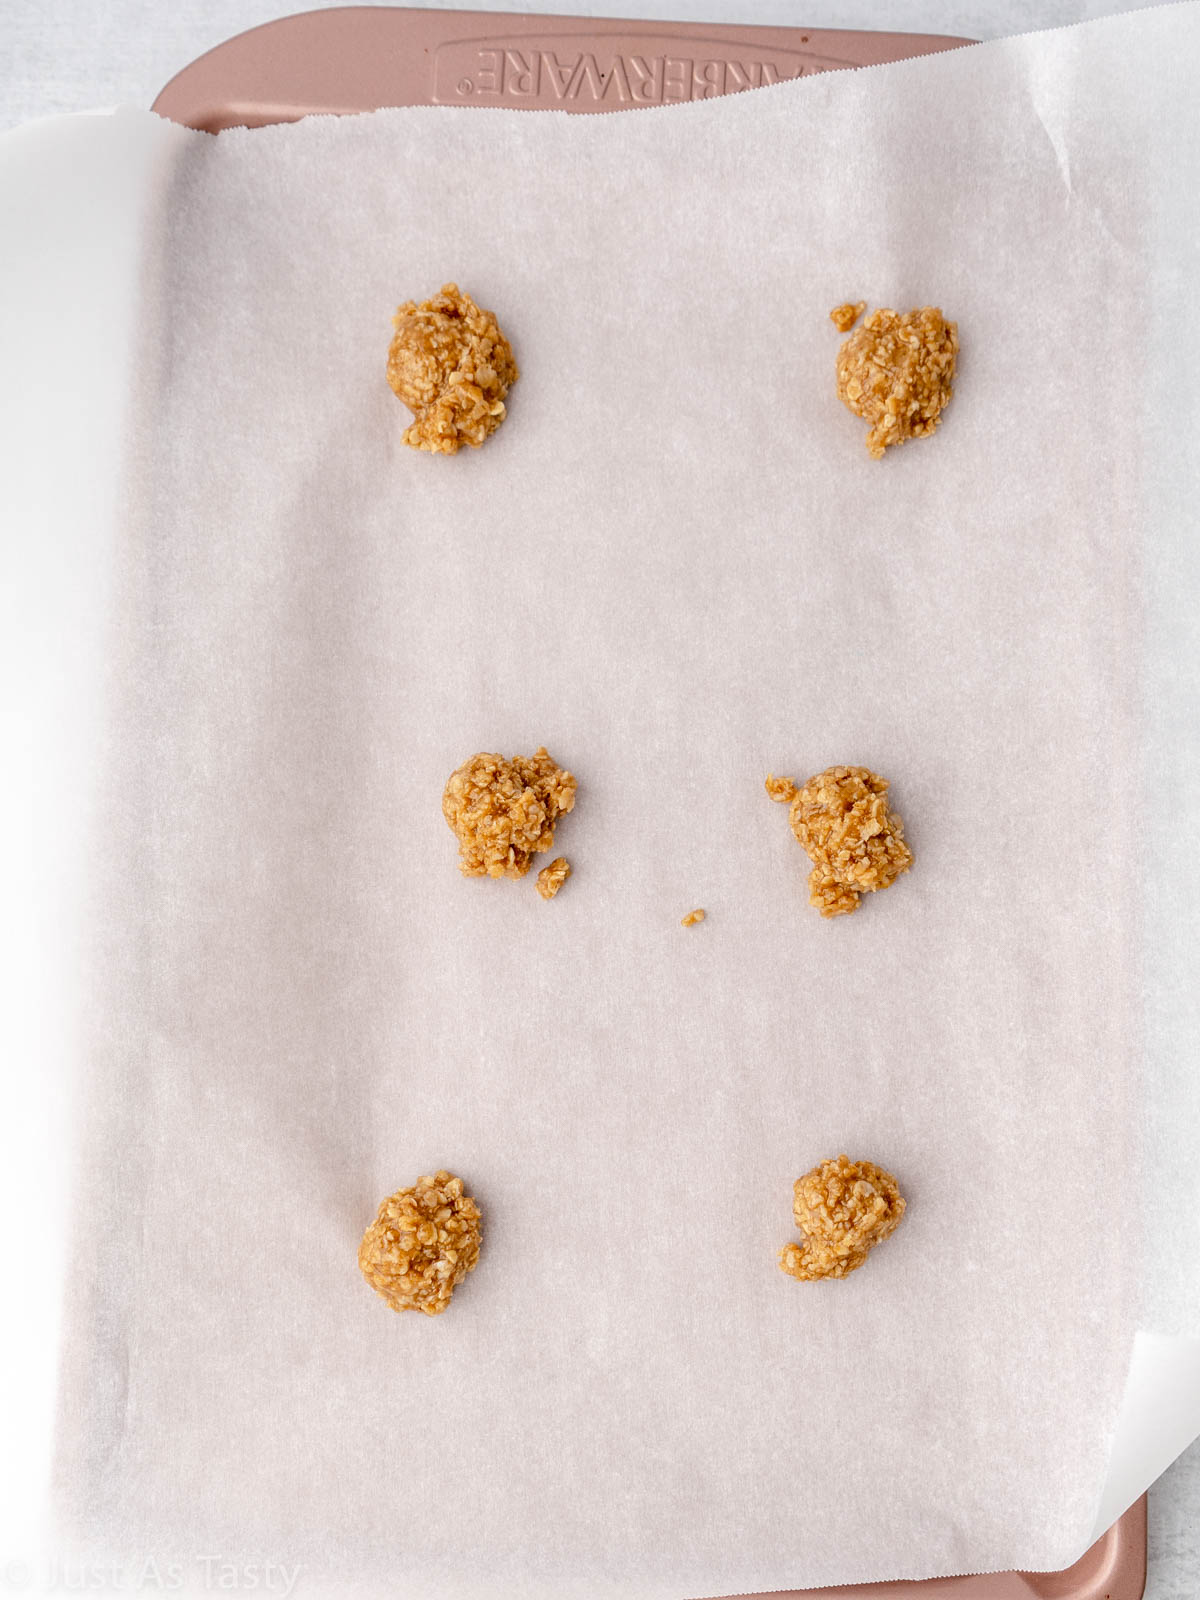 Teaspoons of cookie dough on a lined baking sheet.